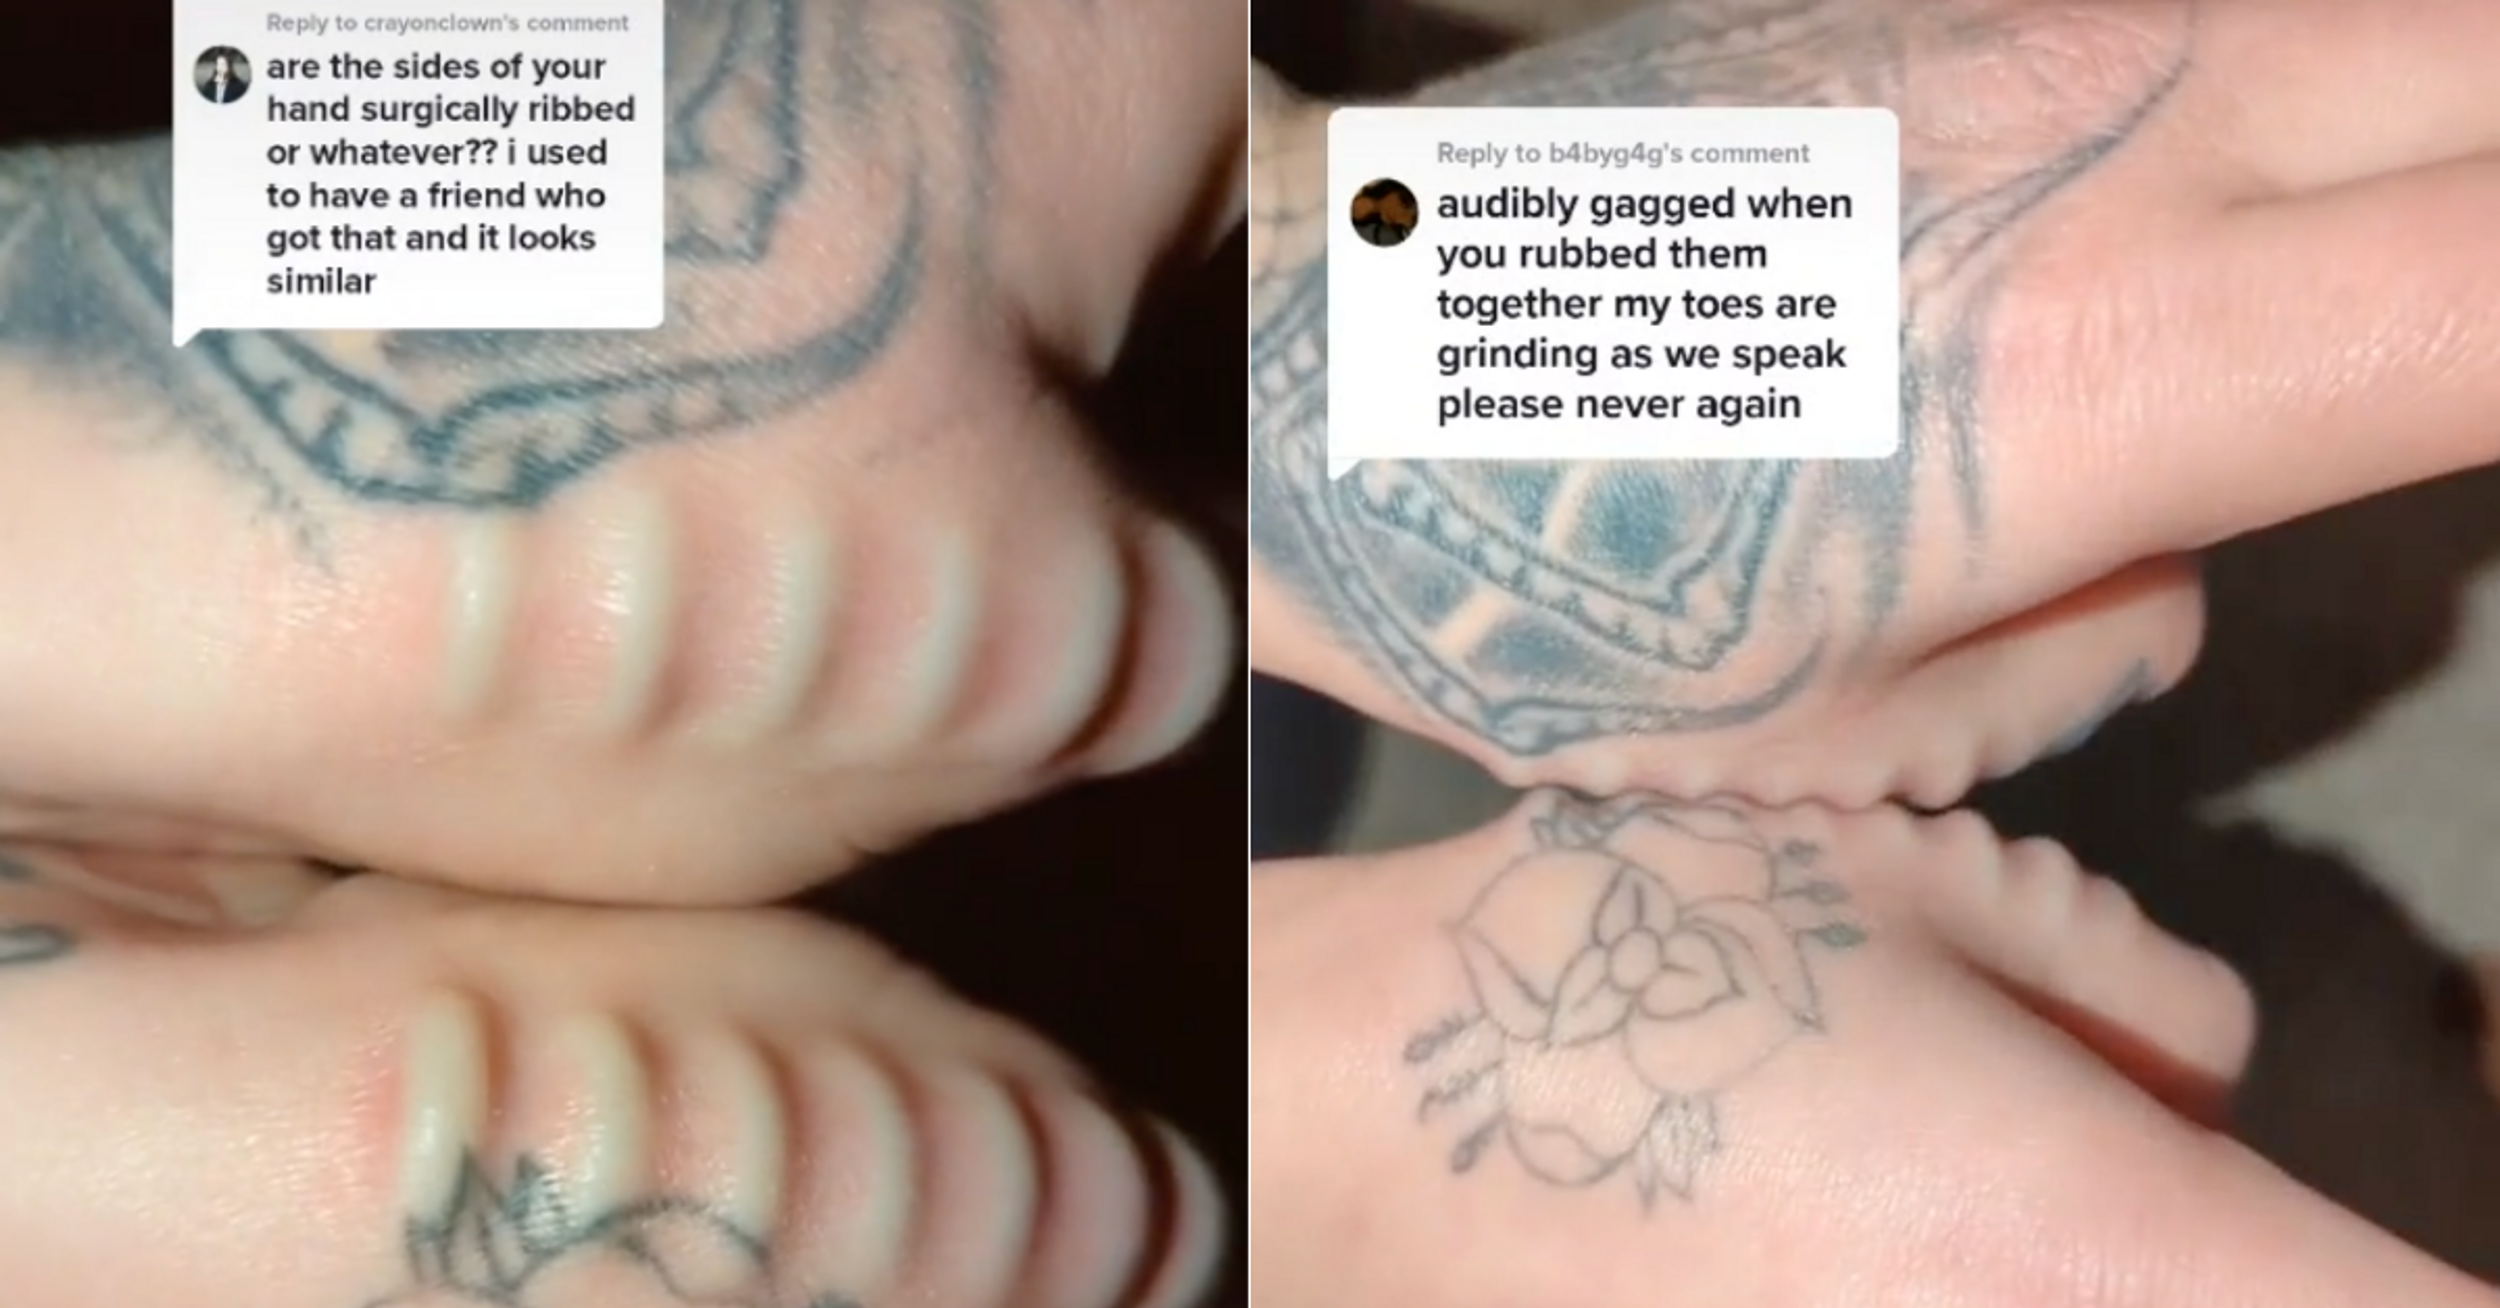 Woman Shows Off Silicone Implants On Her Thumbs She Rubs Together Like A 'Weird Fidget Toy'